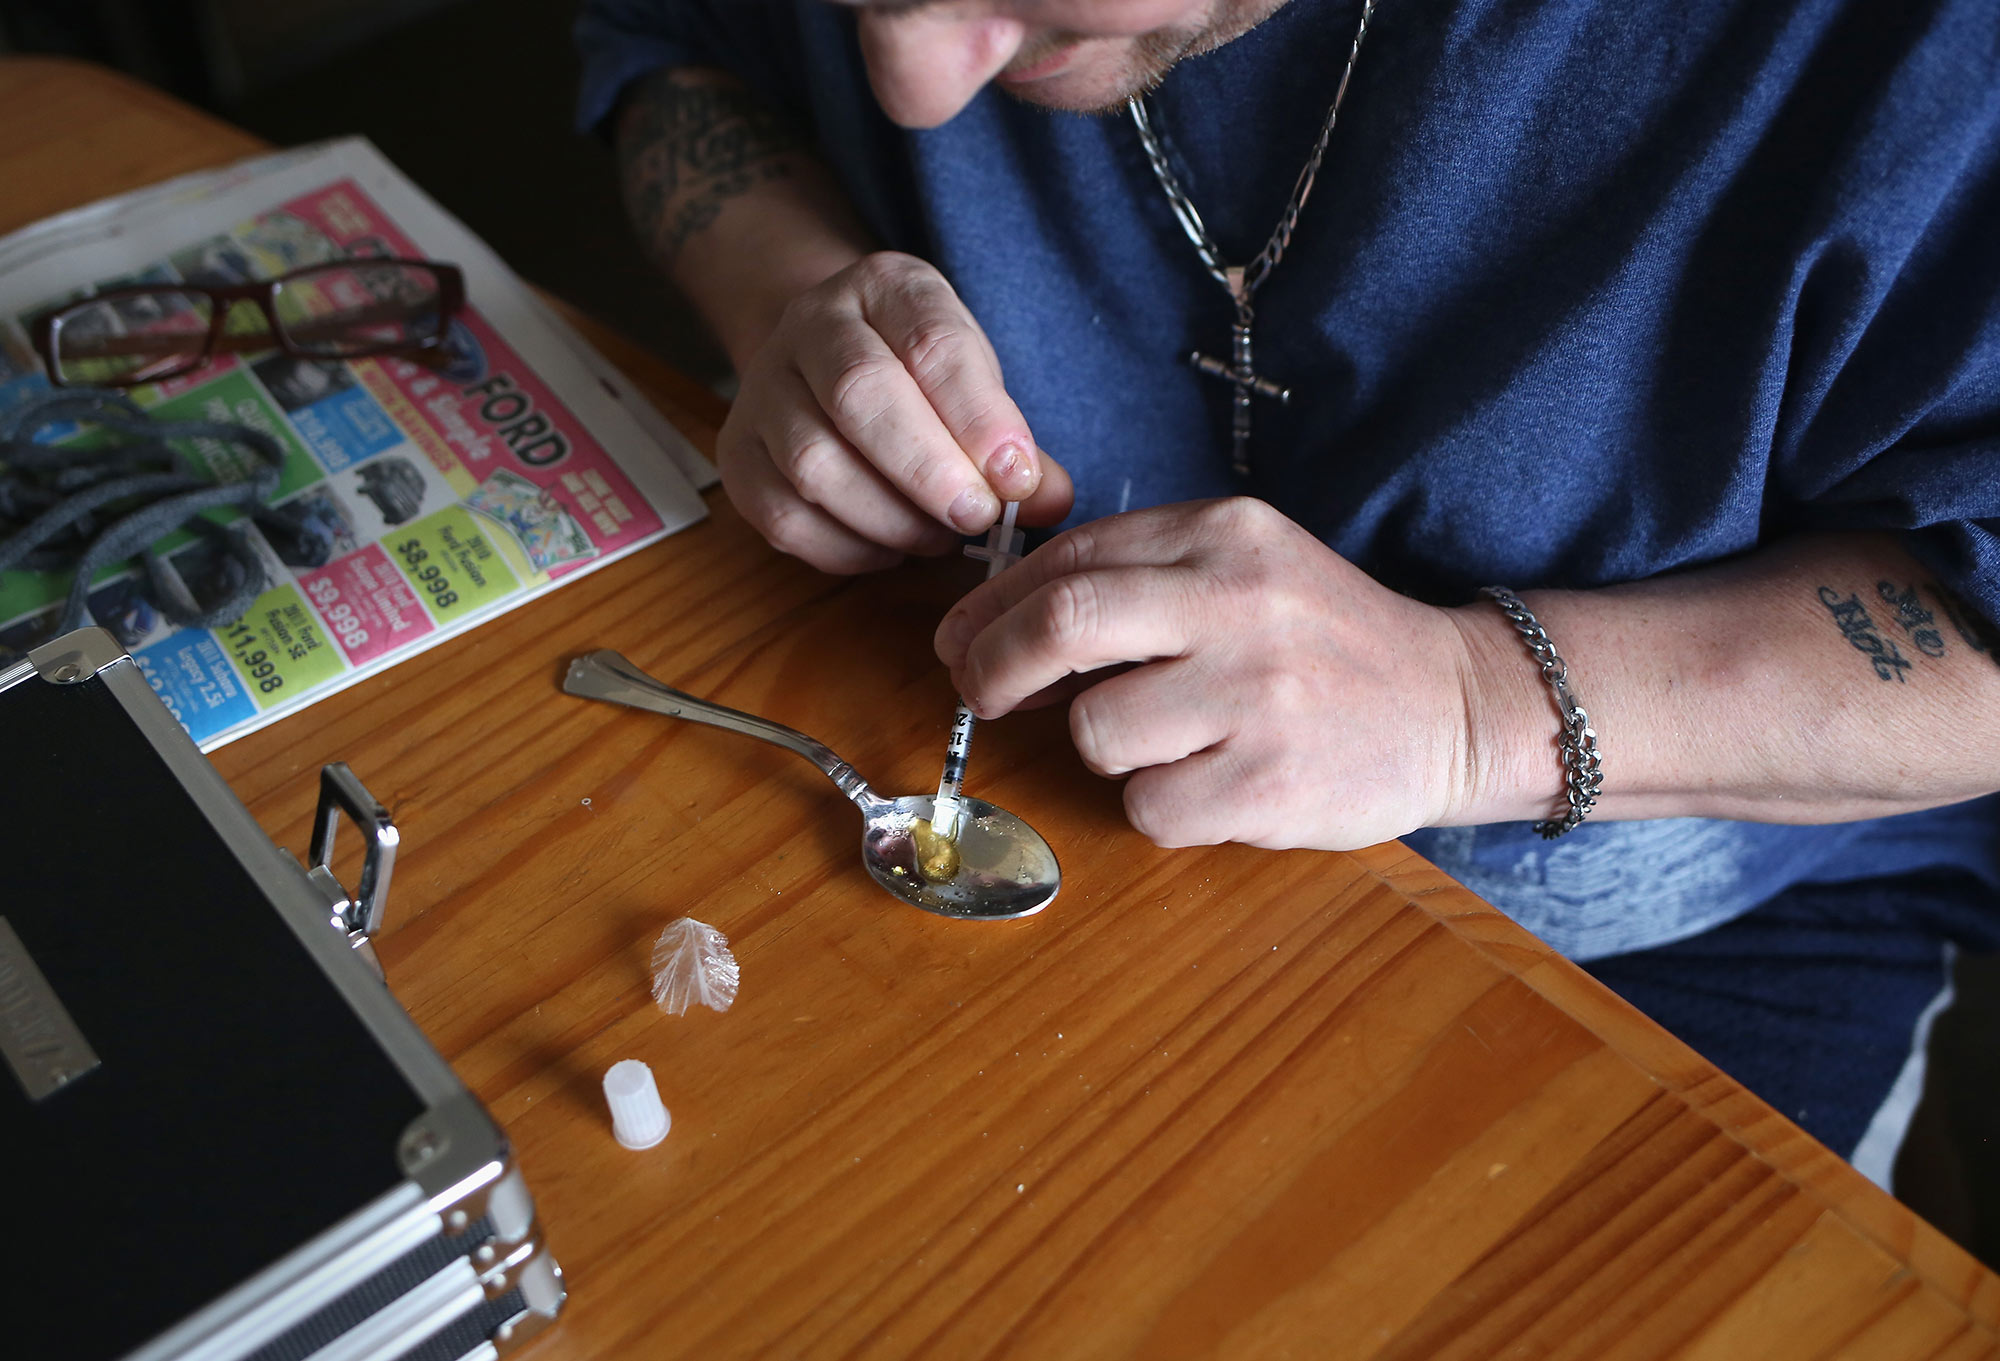 A heroin user prepares to inject himself on March 23, 2016 in New London, Conn.
